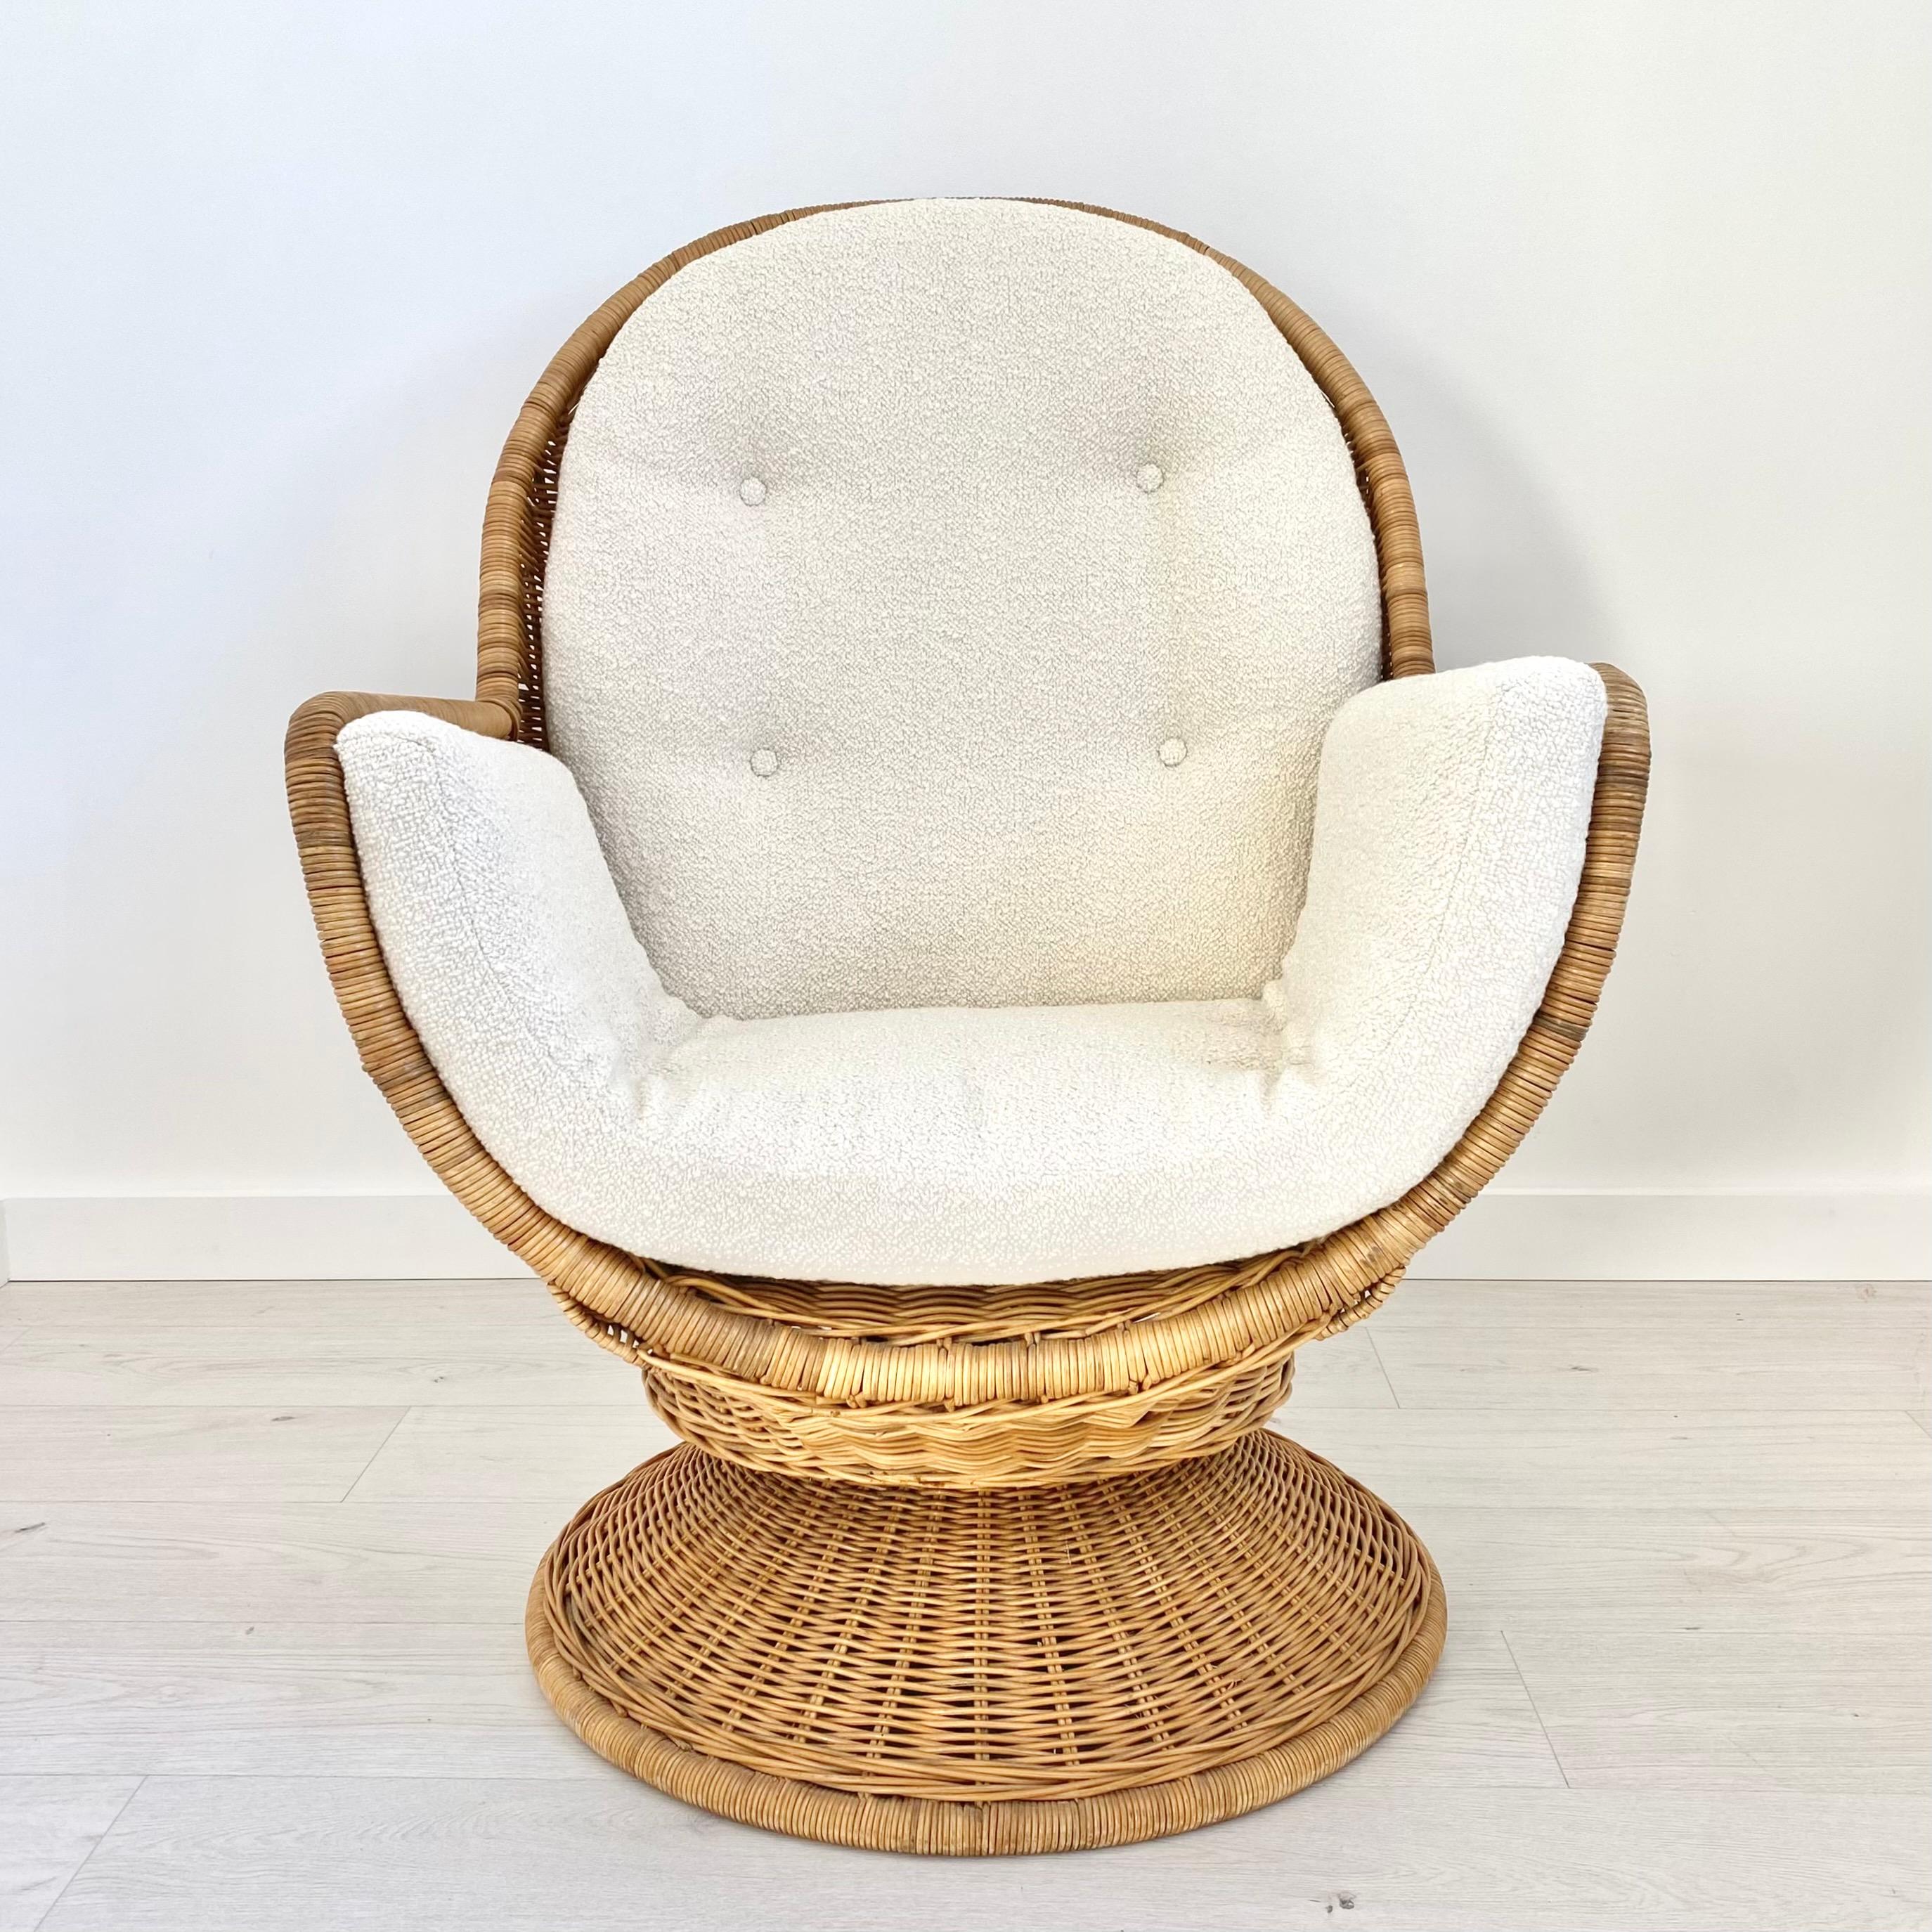 Beautiful egg-shaped rattan and wicker chair from the 1970s. Original cushions newly reupholstered in white wool boucle. Chair swivels 360 degrees and tilts backwards. Incredibly unique design. Perfect accent piece for a touch of warmth and fun in